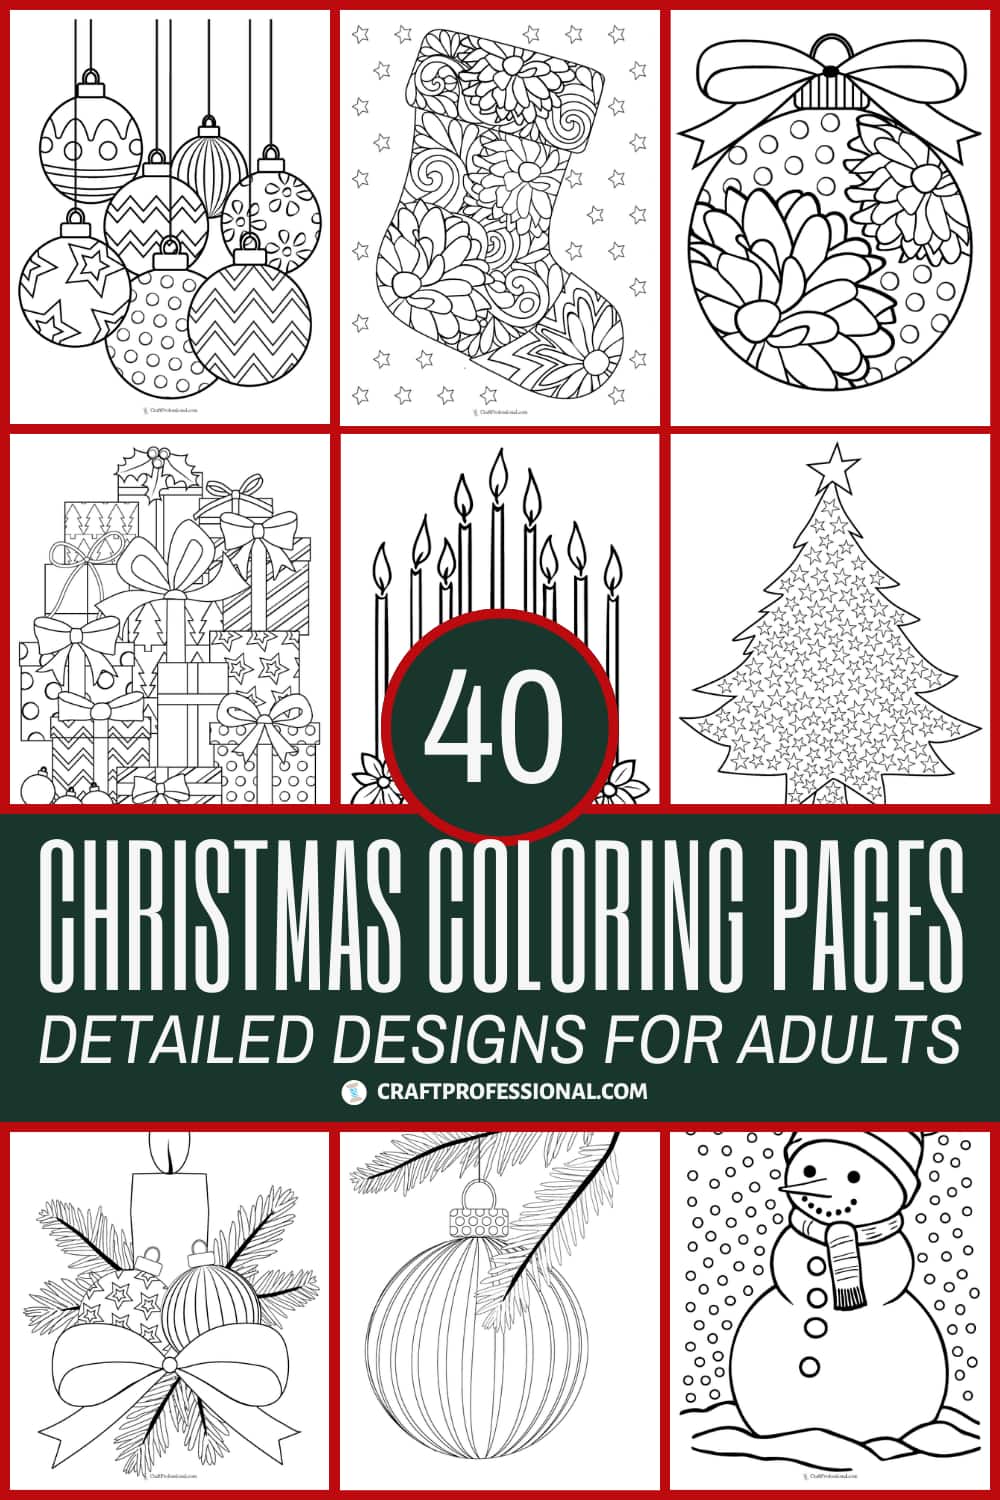 8 adult coloring books that are way better while high